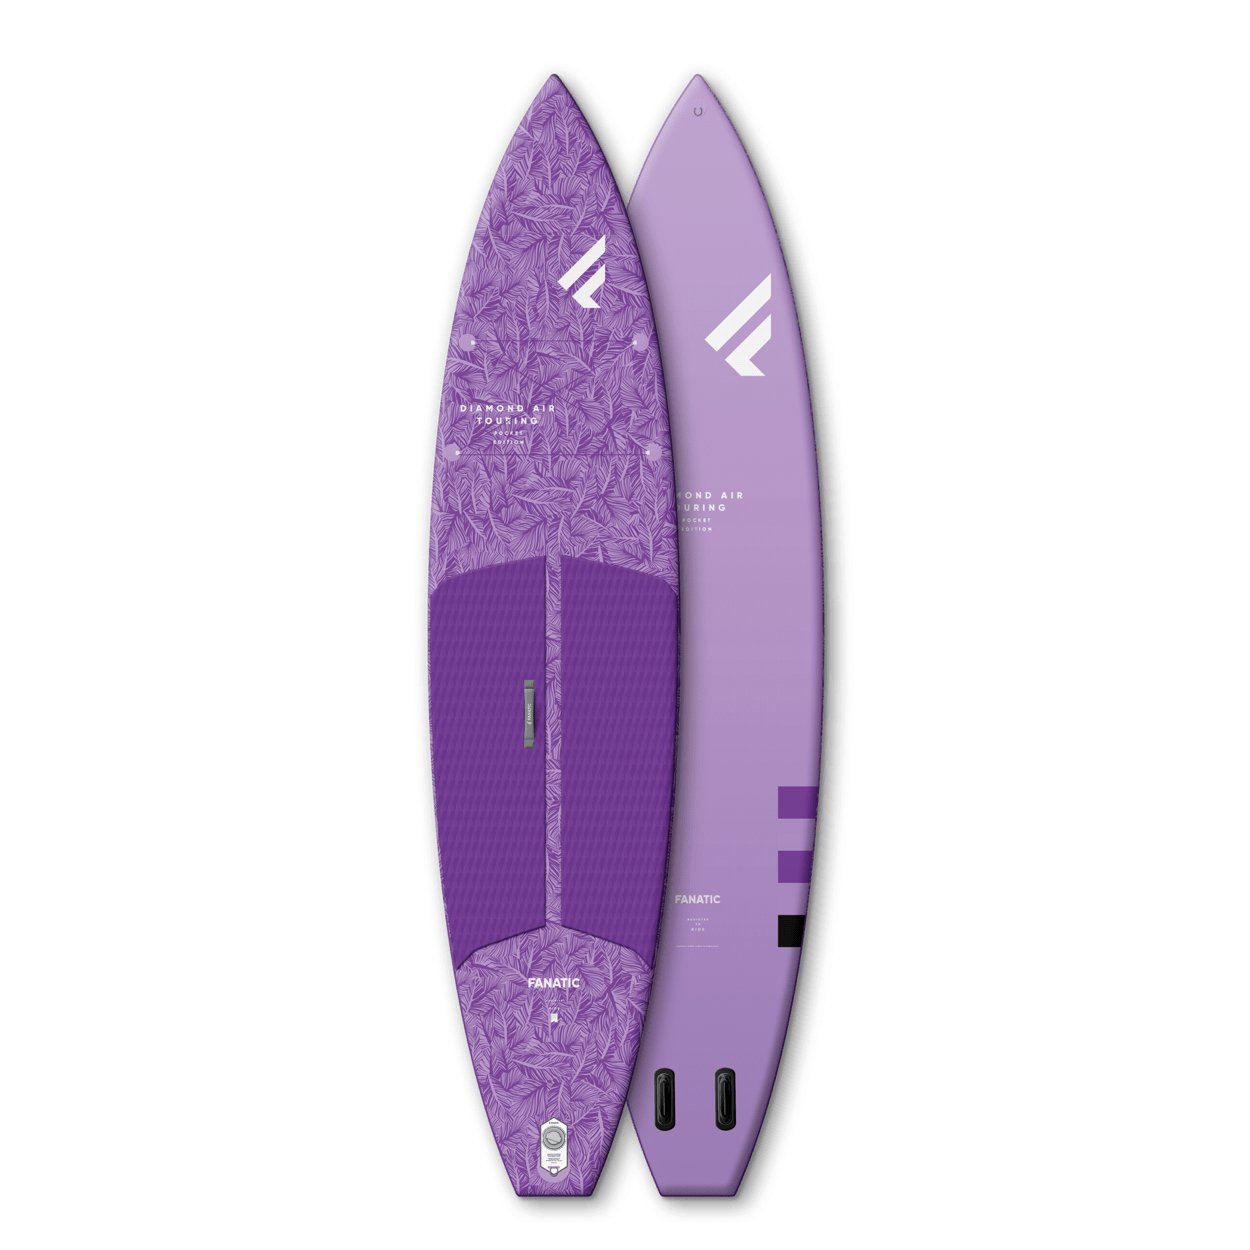 Fanatic Diamond Air Touring Pocket 2022 - Worthing Watersports - 9010583015842 - SUP Inflatables - Fanatic SUP